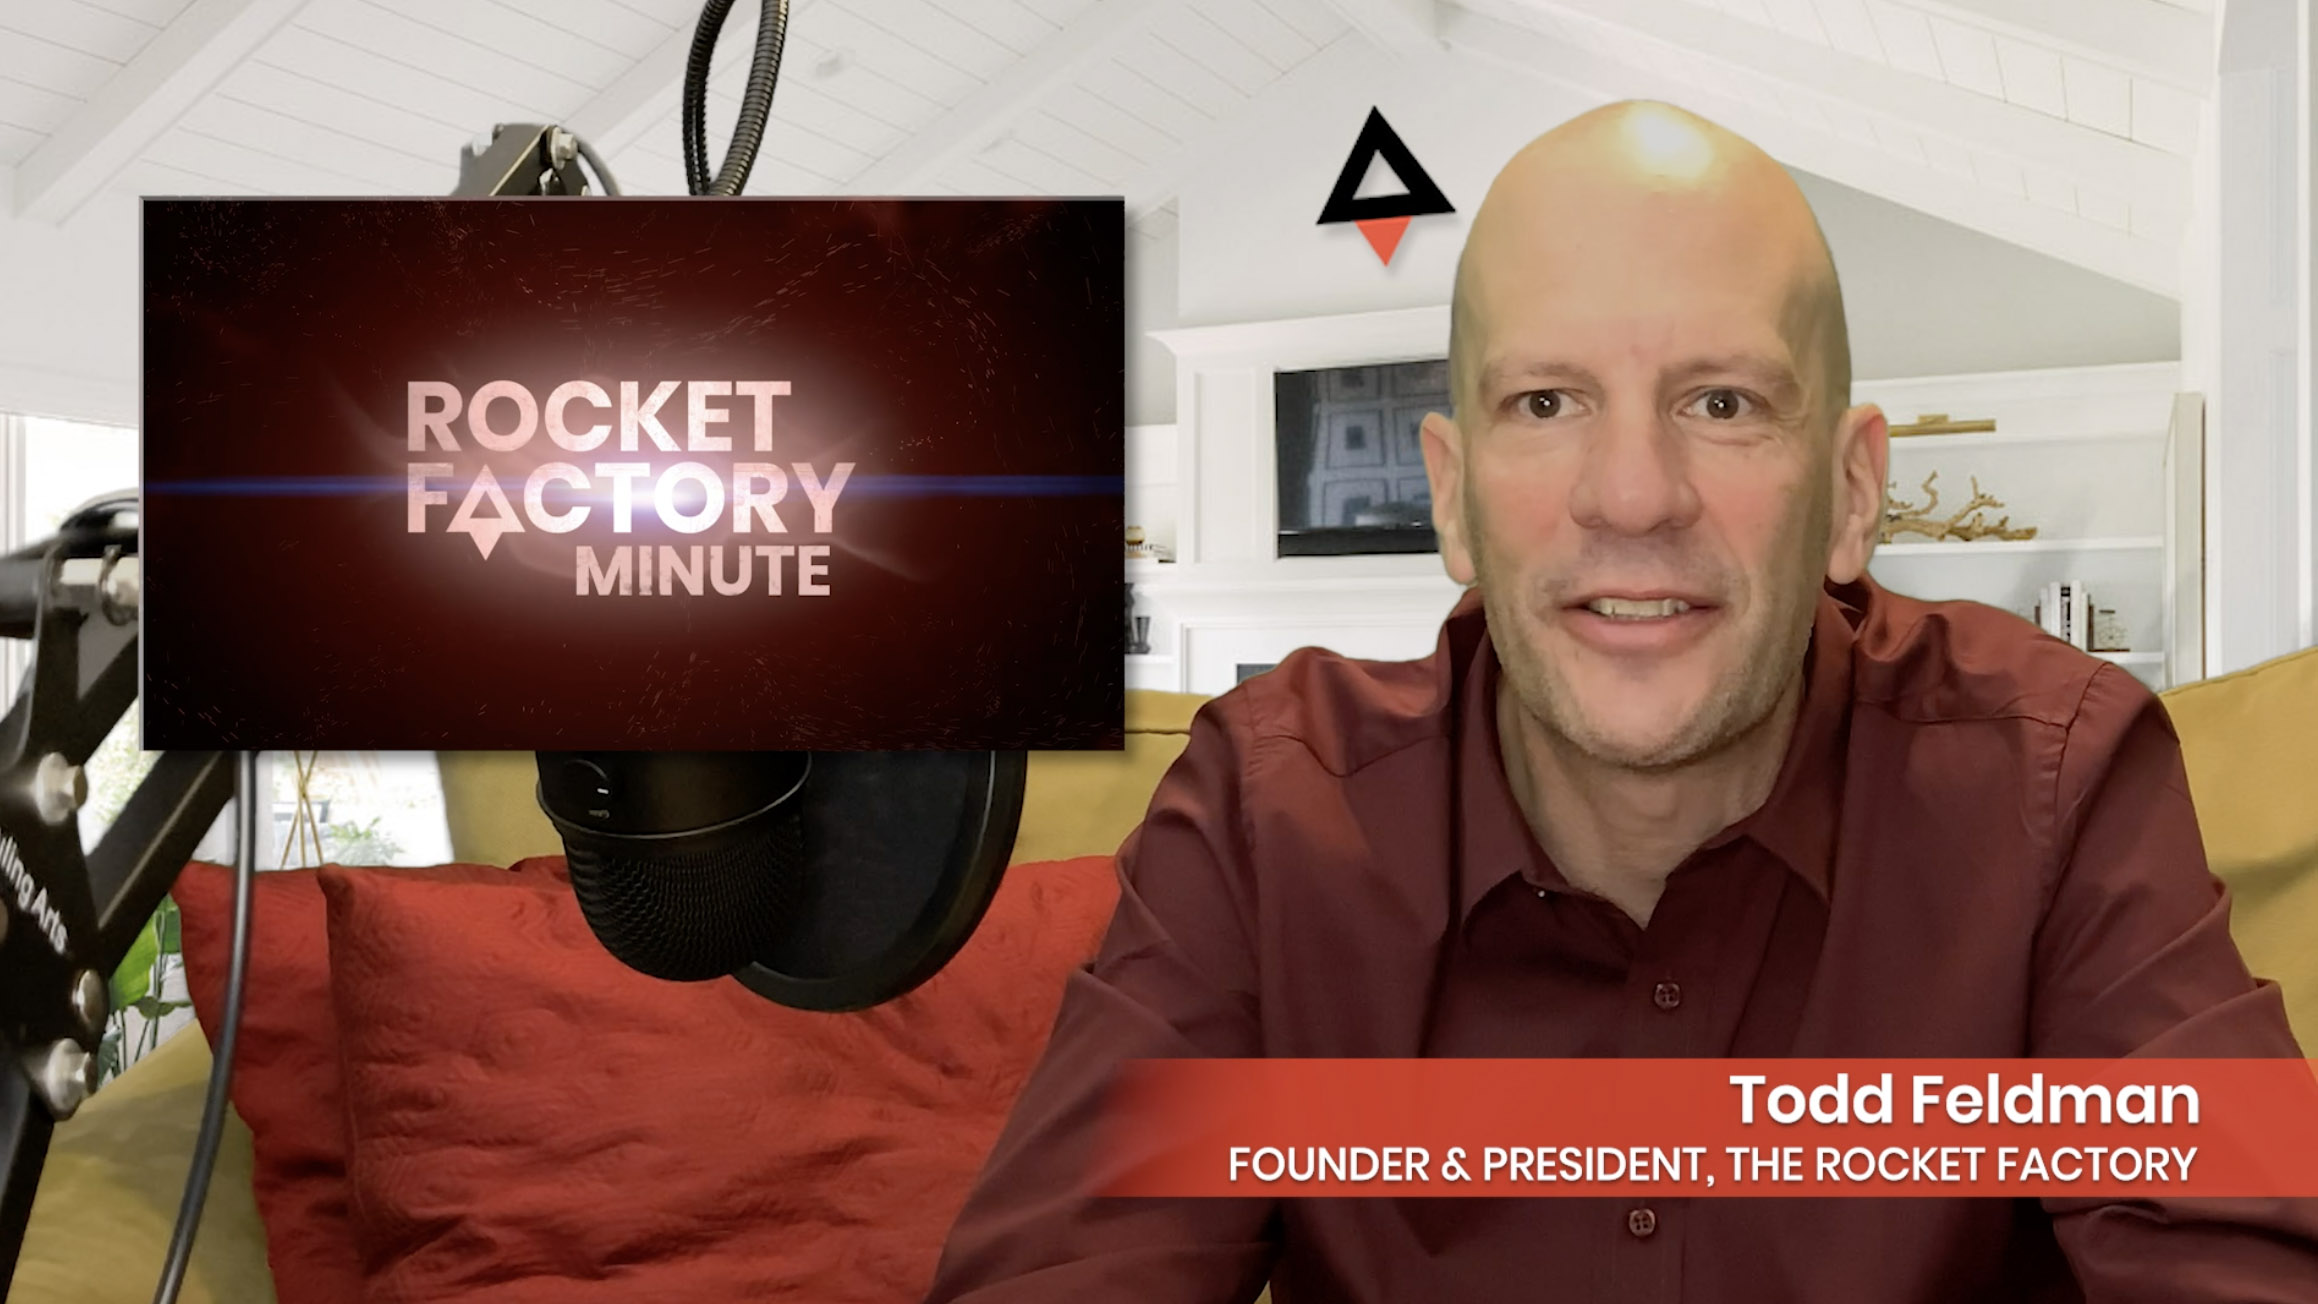 The Rocket Factory Minute